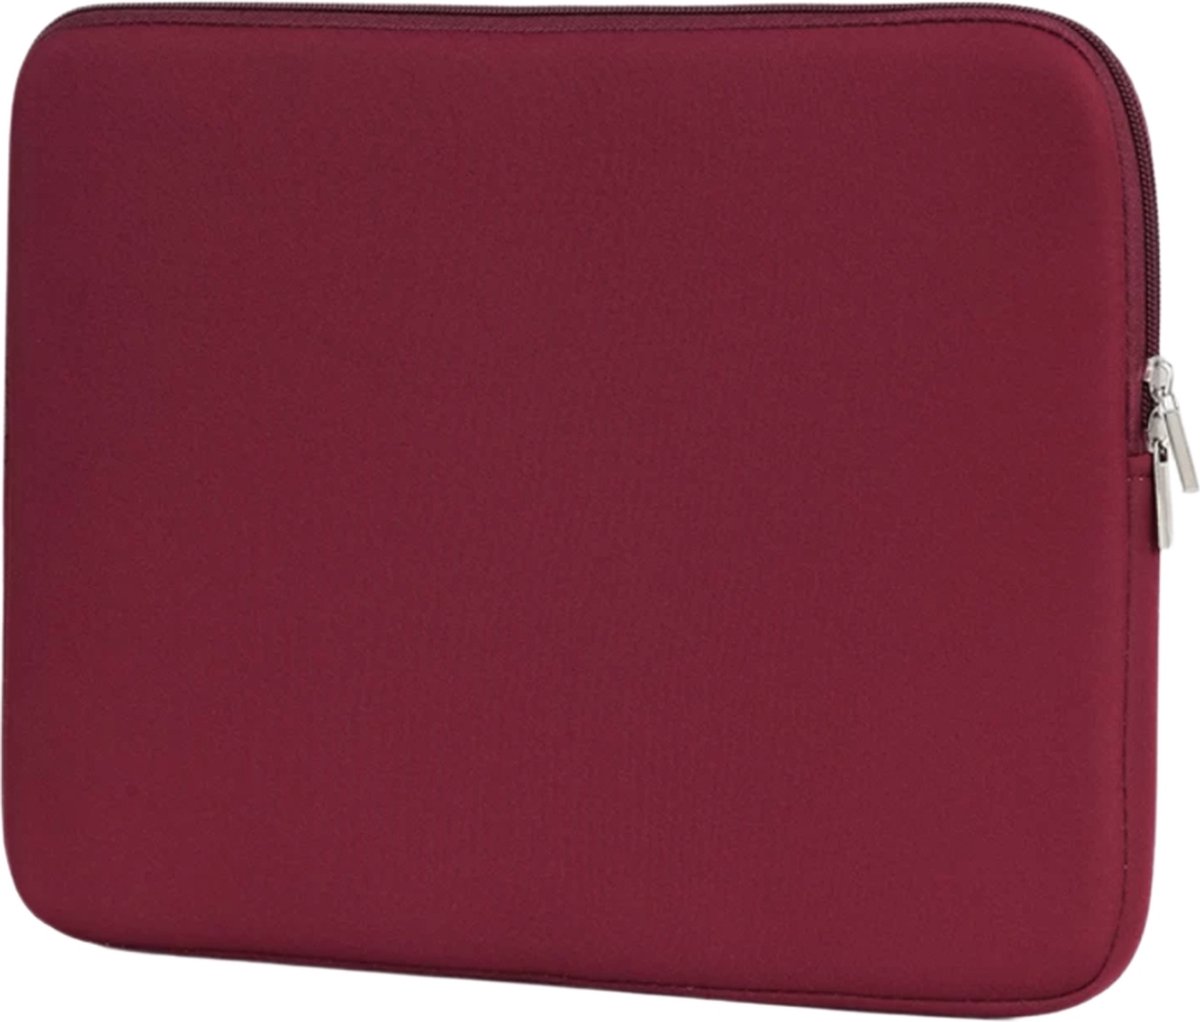 Sleeve – laptophoes – extra bescherming – 15,6 inch – bordeaux rood - Ultra Licht - Dubbele Ritssluiting